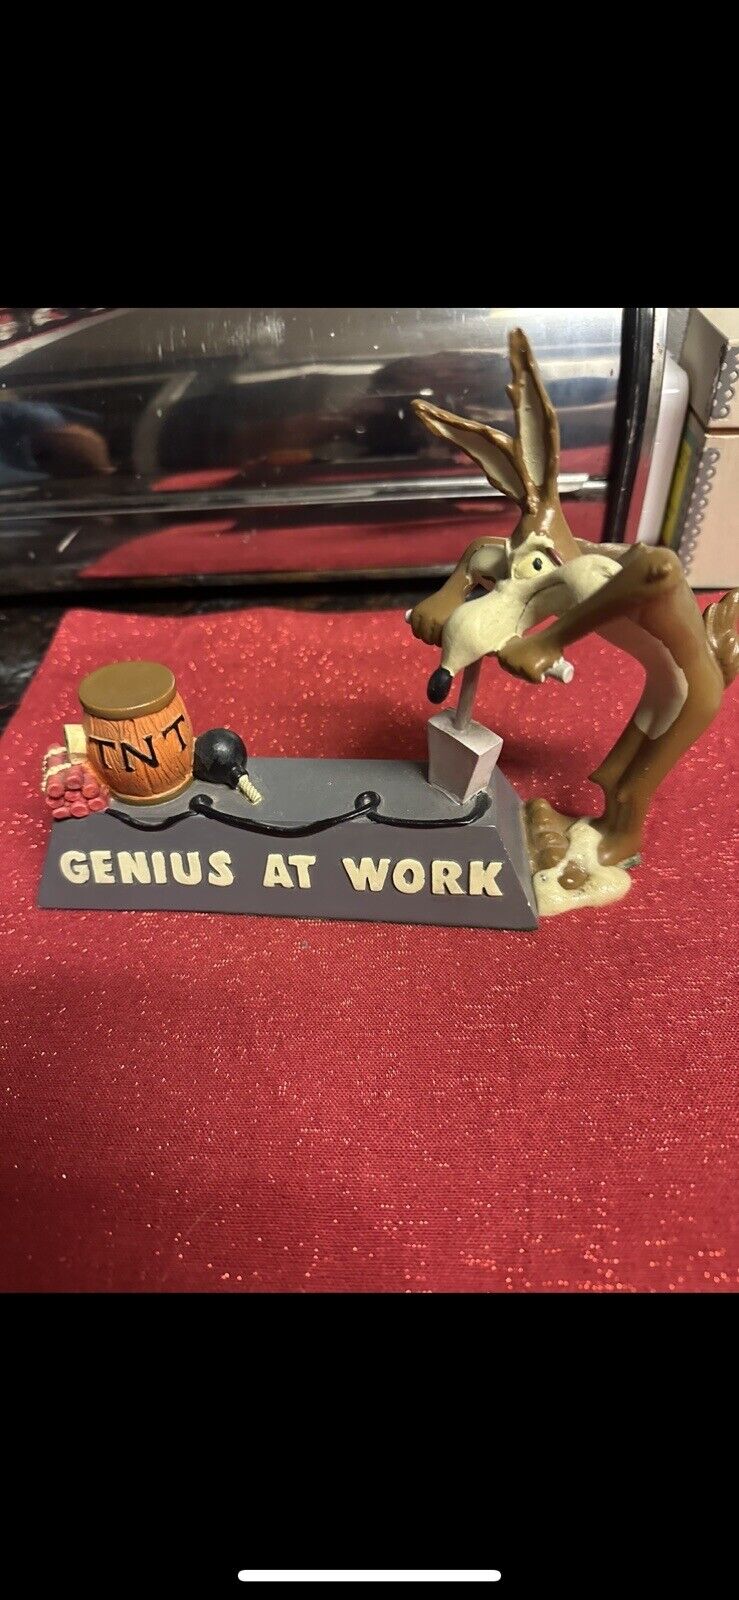 WYLIE COYOTE WITH TNT “GENIUS AT WORK” STATUE VINTAGE  RARE (MINT CONDITION)